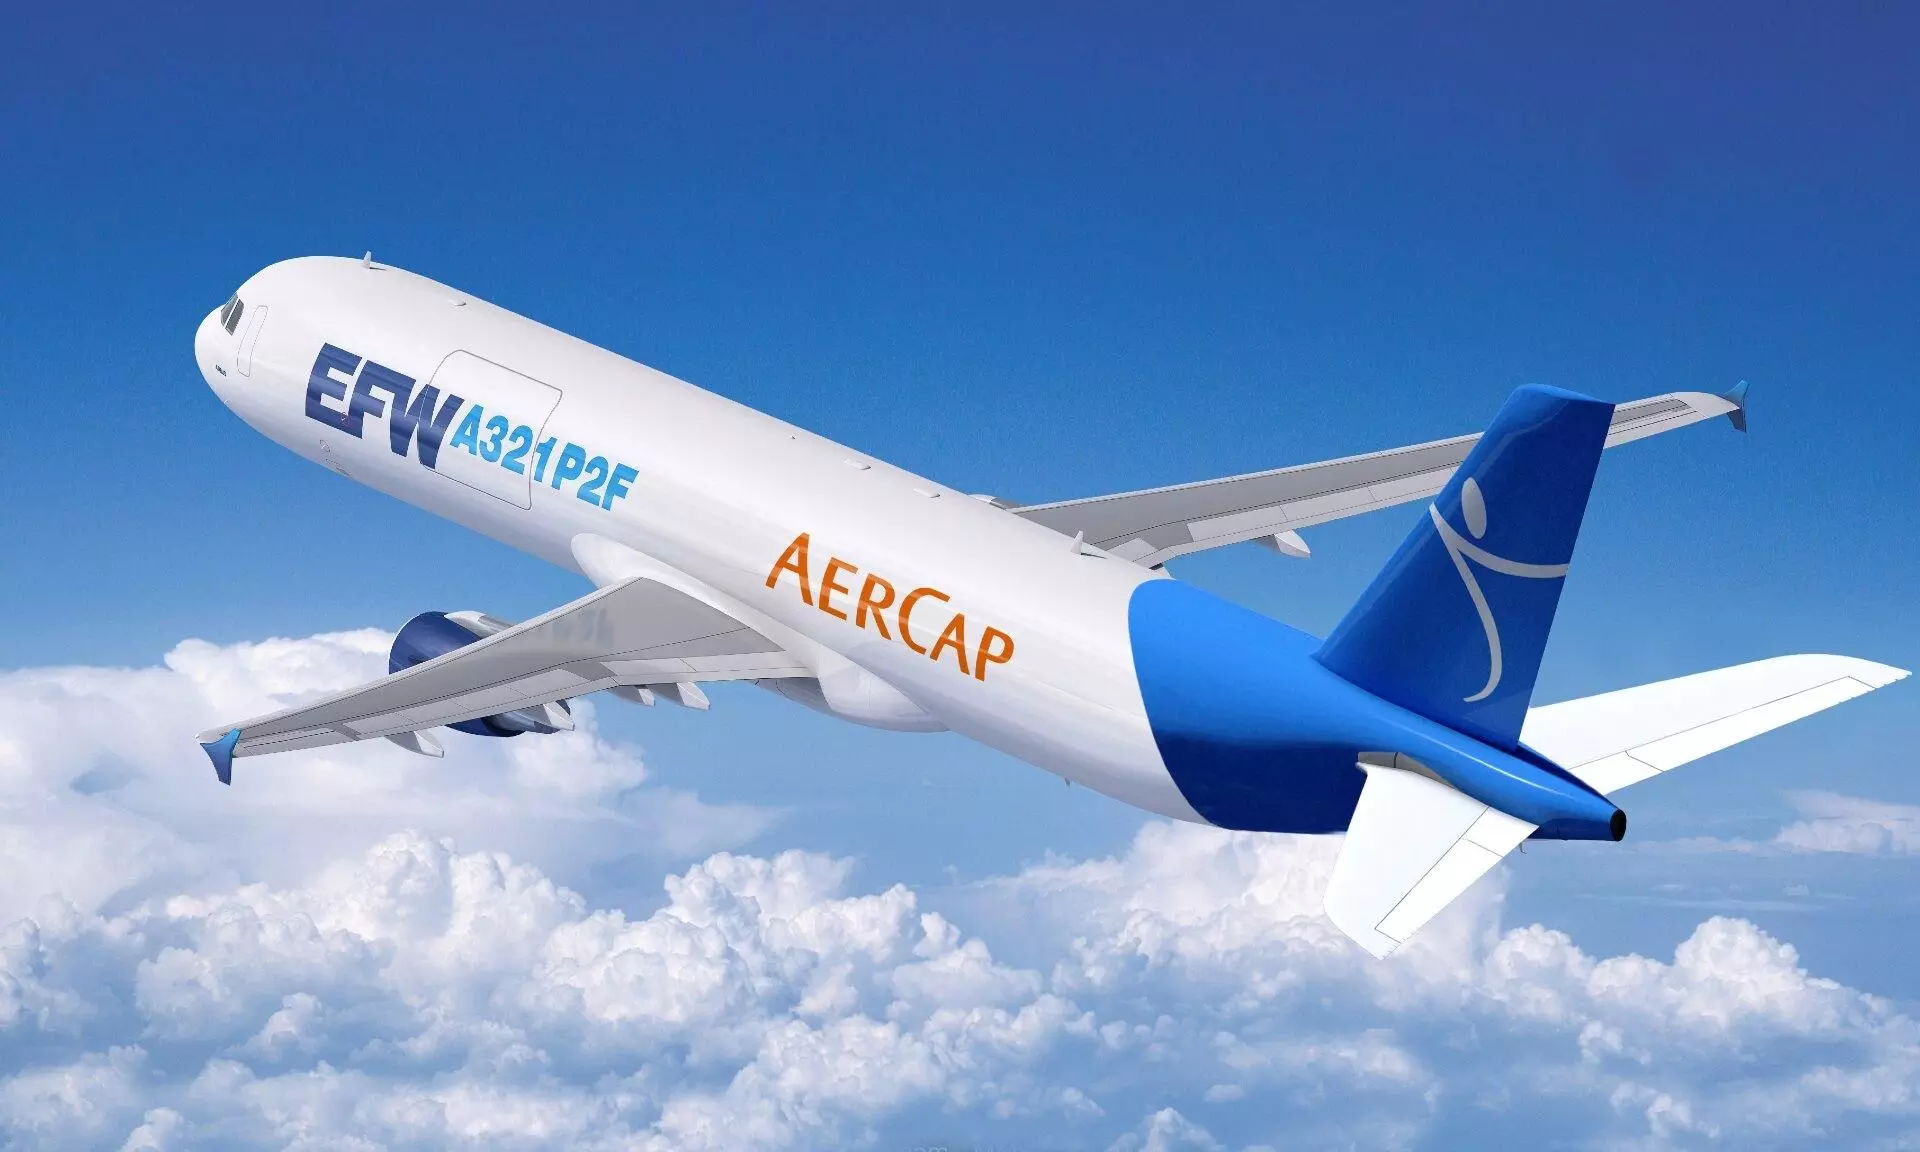 AerCap agrees with EFW for up to 30 Airbus A321 P2F conversions